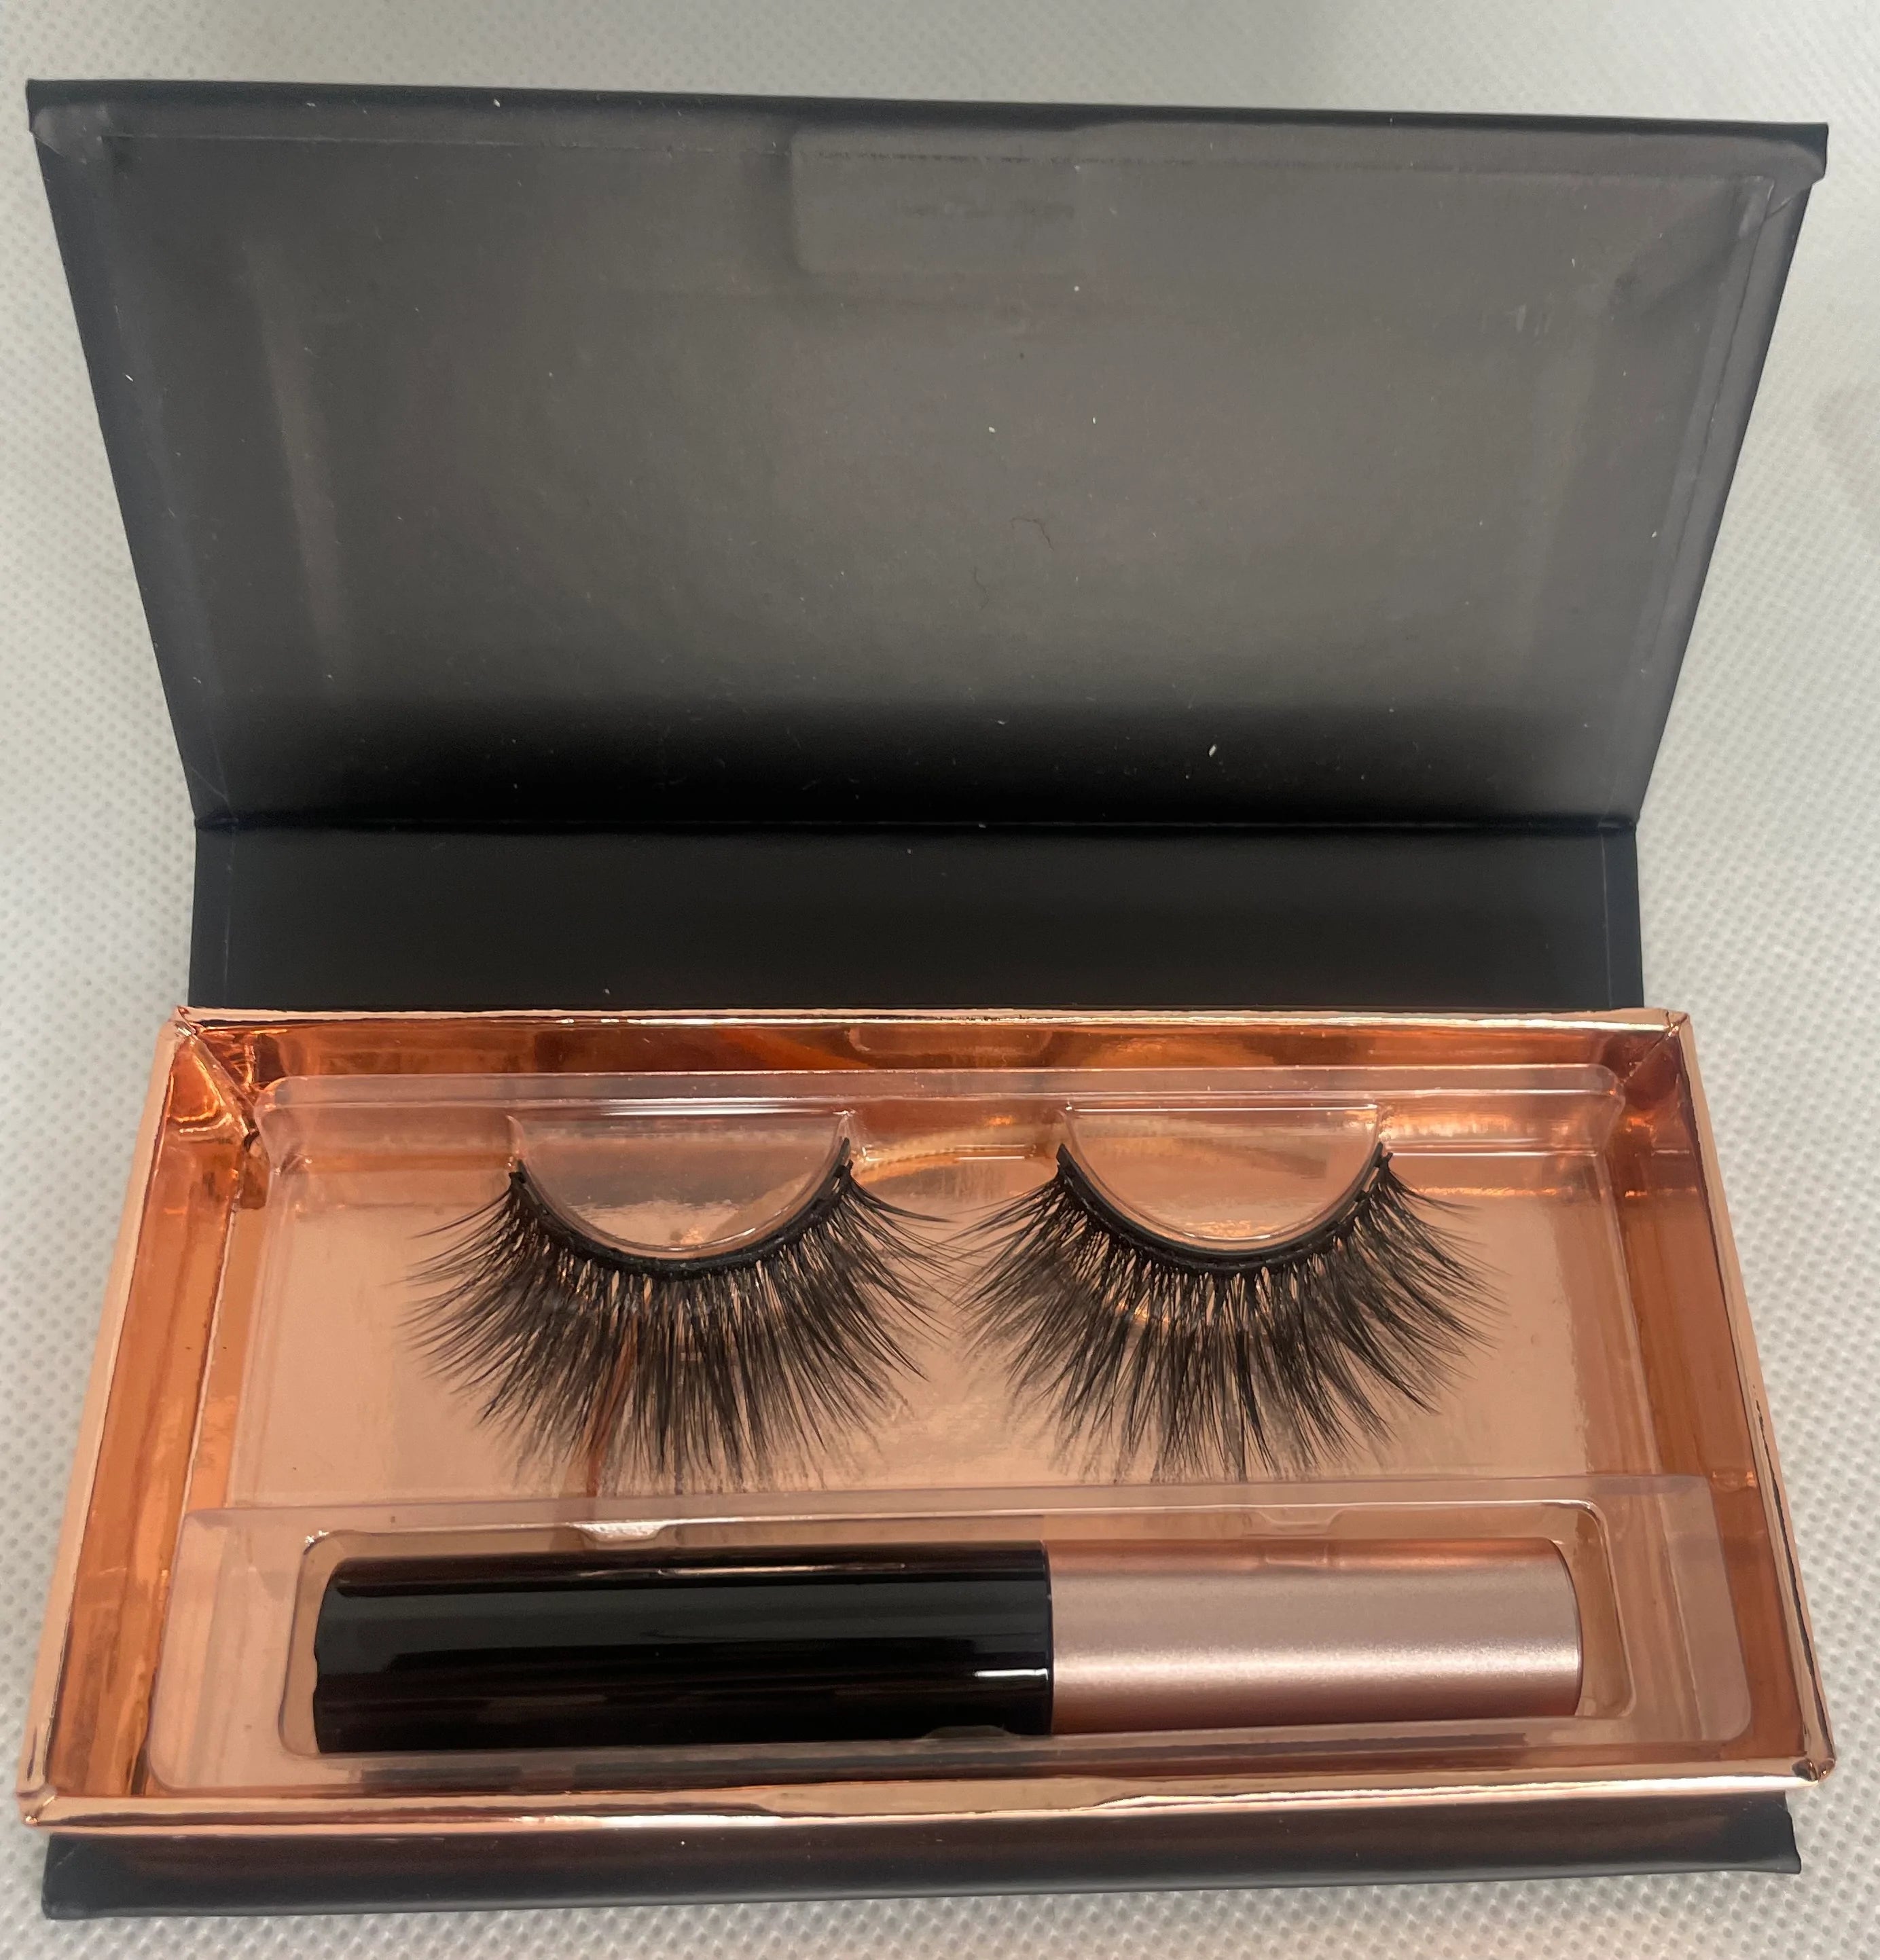 Load video: Video on how to apply our magnetic liner lashes.